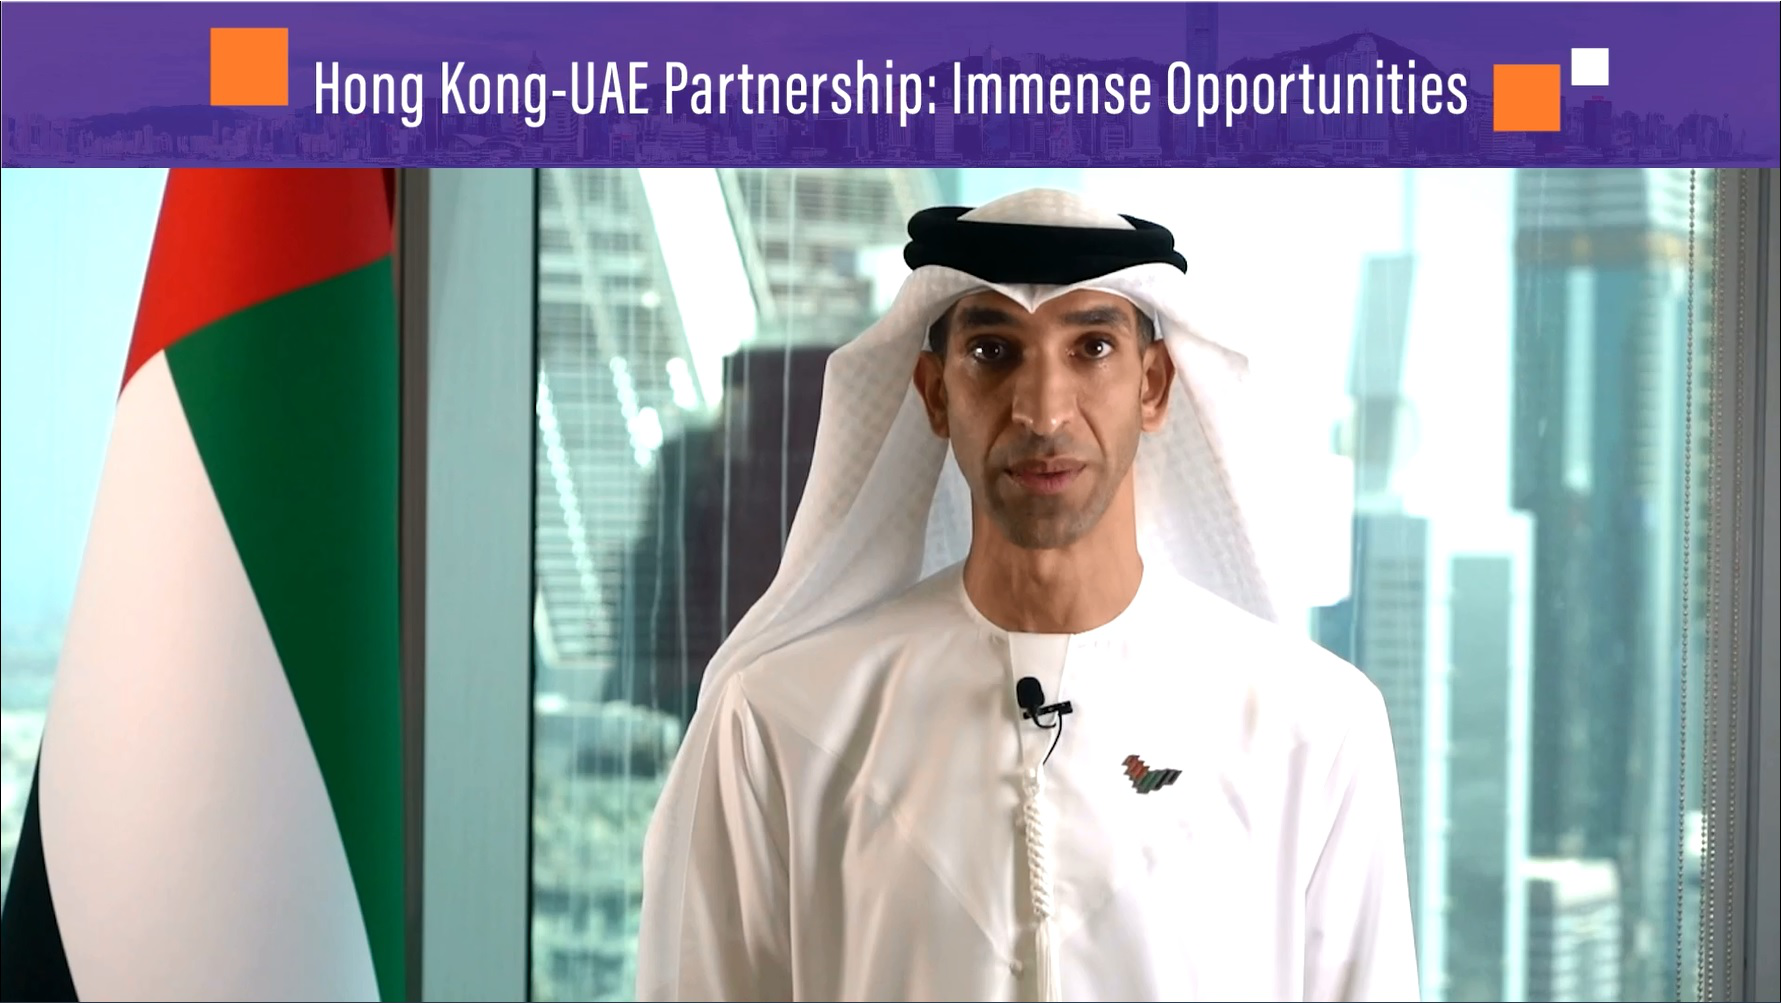 The Minister of State for Foreign Trade of the Ministry of Economy of the UAE, H.E. Dr Thani bin Ahmed Al Zeyoudi, delivers responding remarks at the webinar.